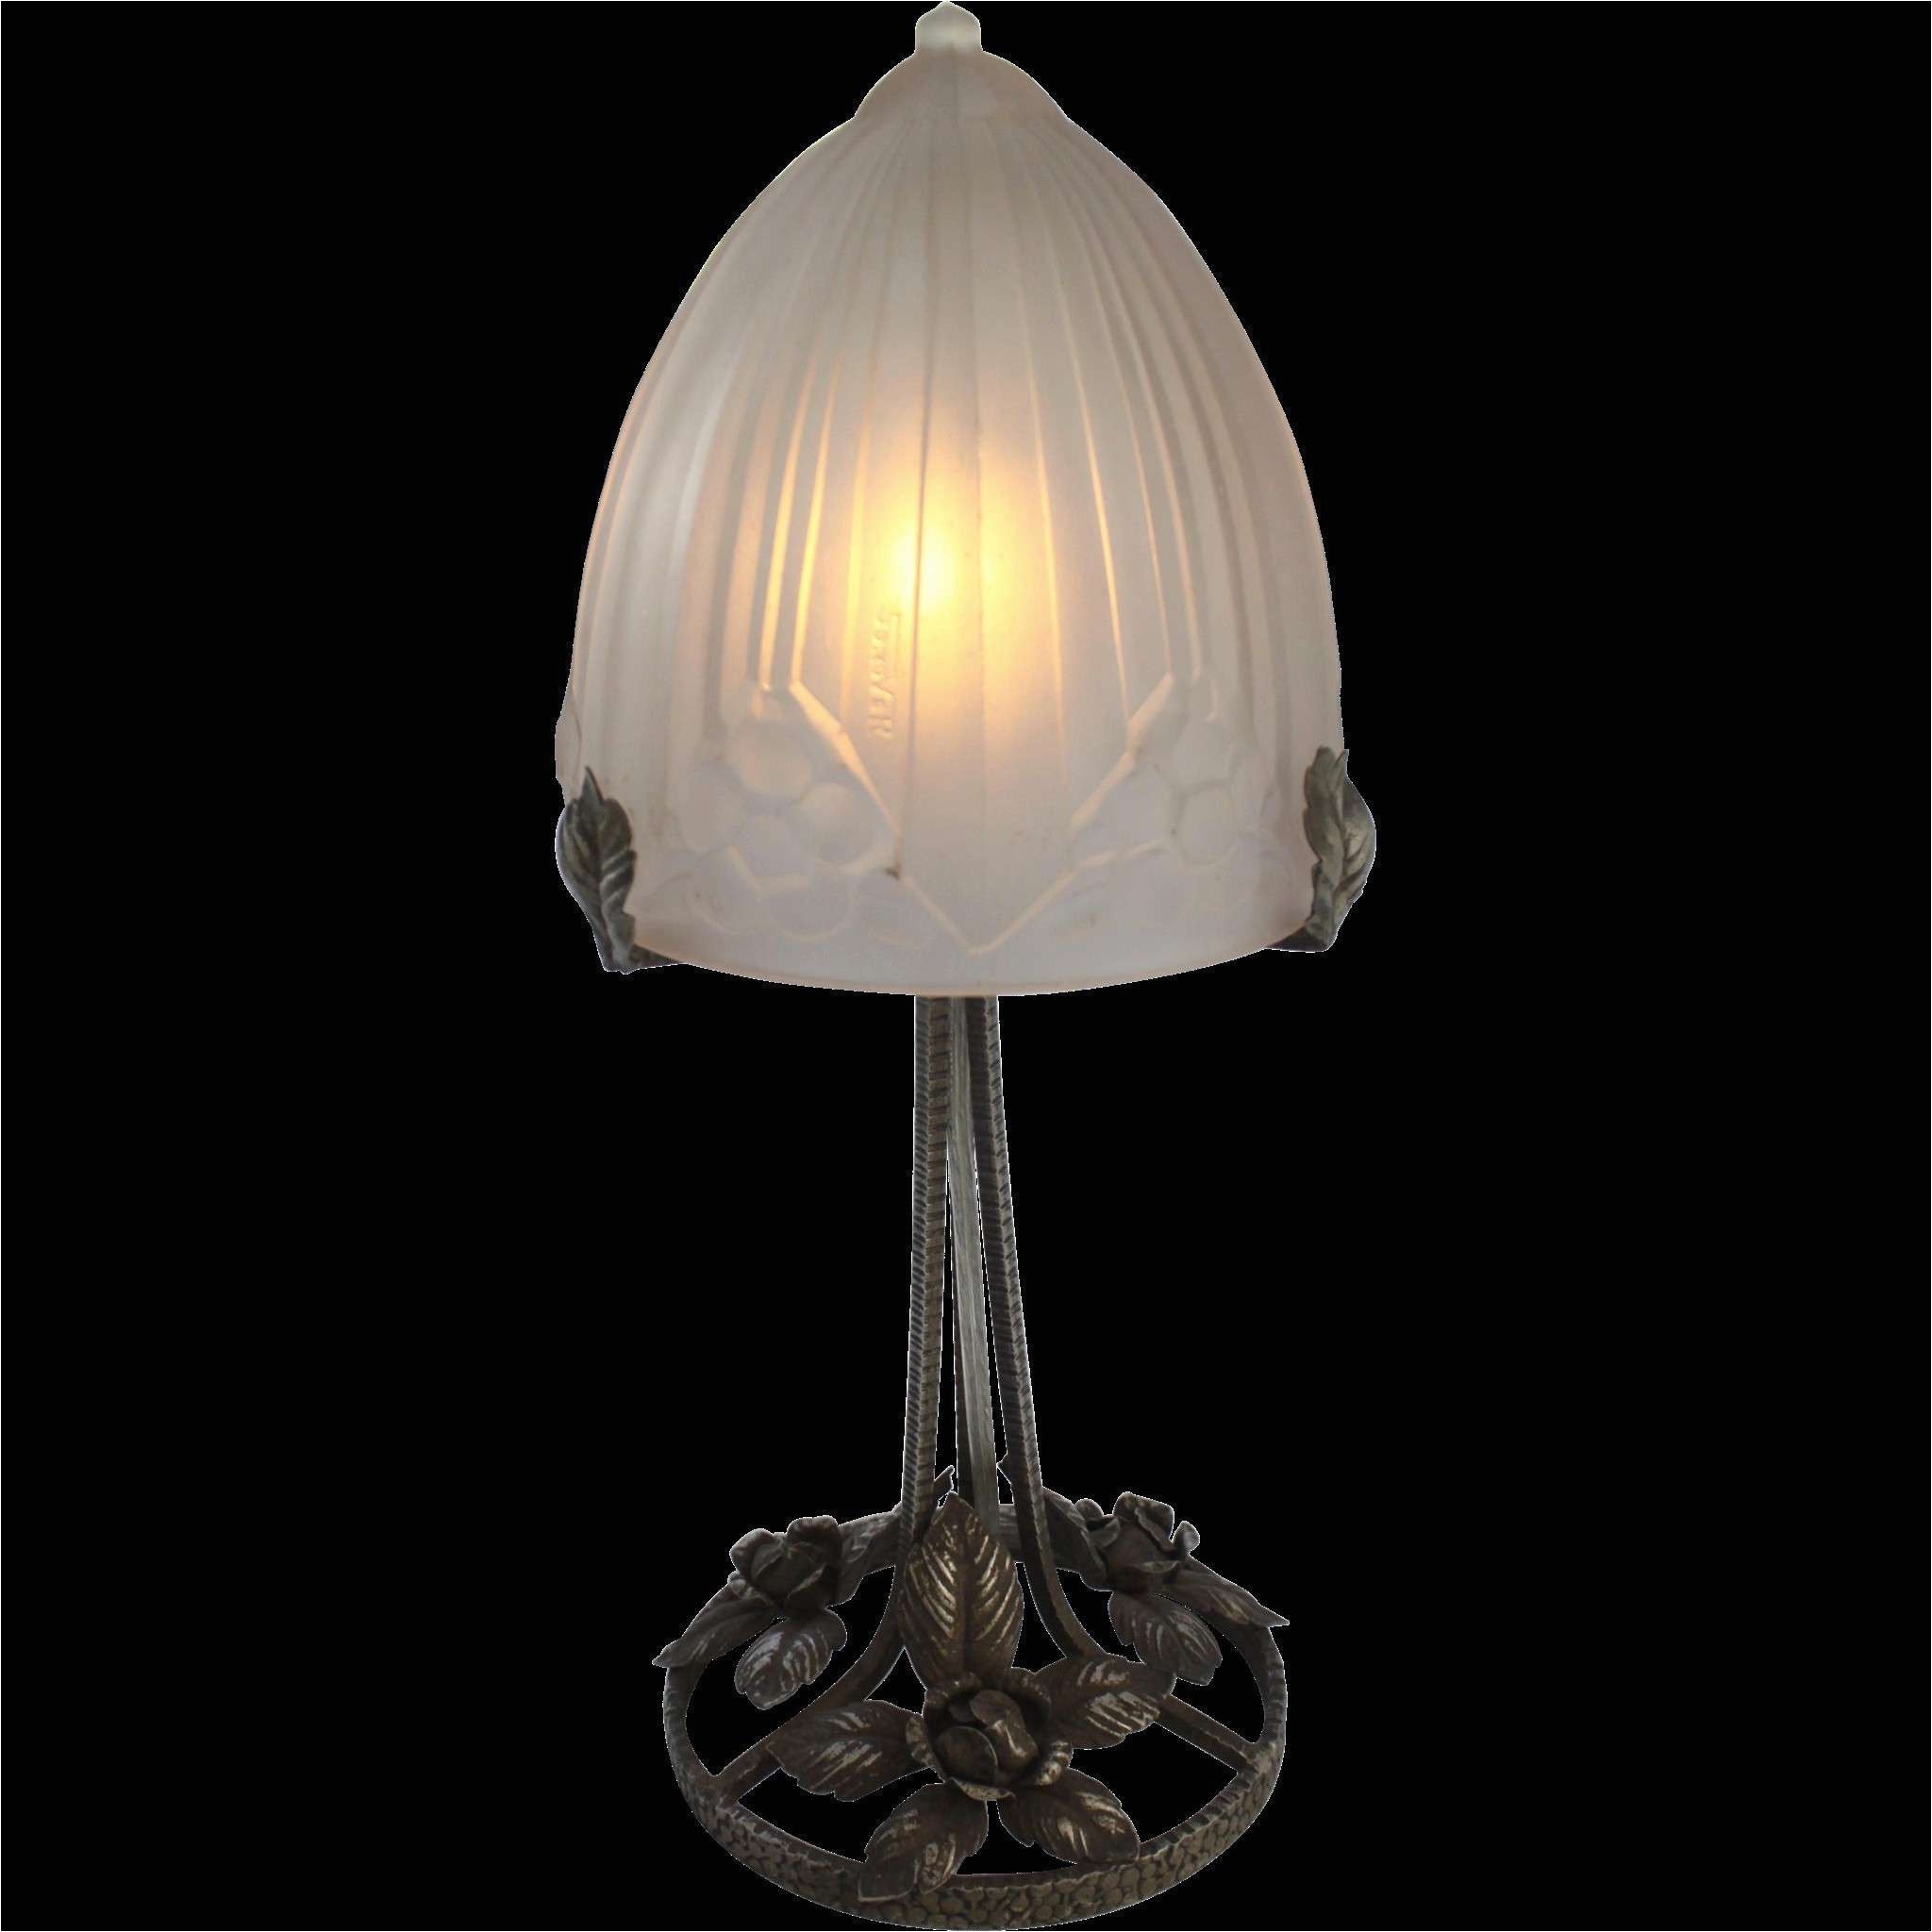 Small Table Lamps at Home Depot Divine Exterior Lights Home Depot with Exterior Floor Lamps